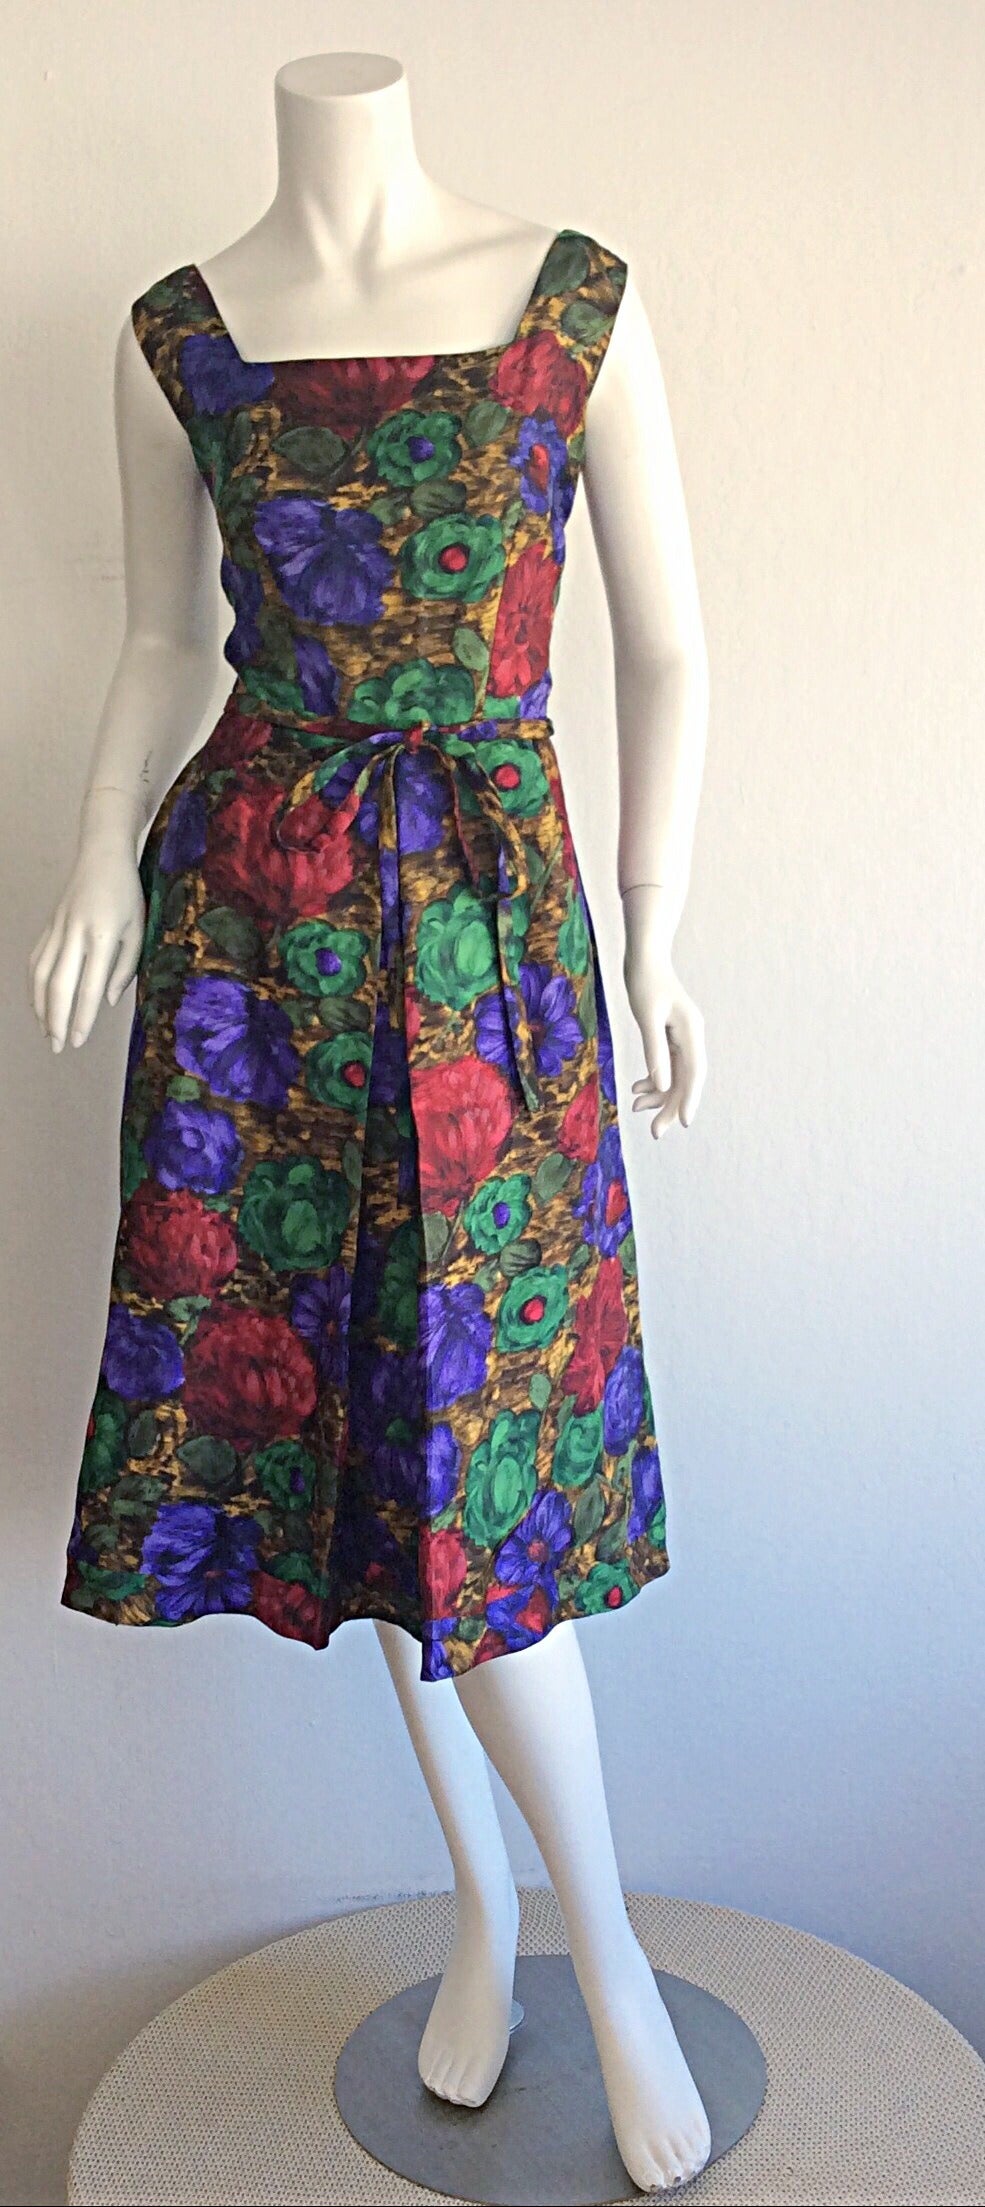 Simply divine vintage 1950s Adele Ross watercolor dress! Features the finest silk fabric, with wonderful vibrant hues. Detachable ribbon belt. Can easily go from day to night. Zips up the back, with hook-and-eye closure at back neck. Fully lined. In